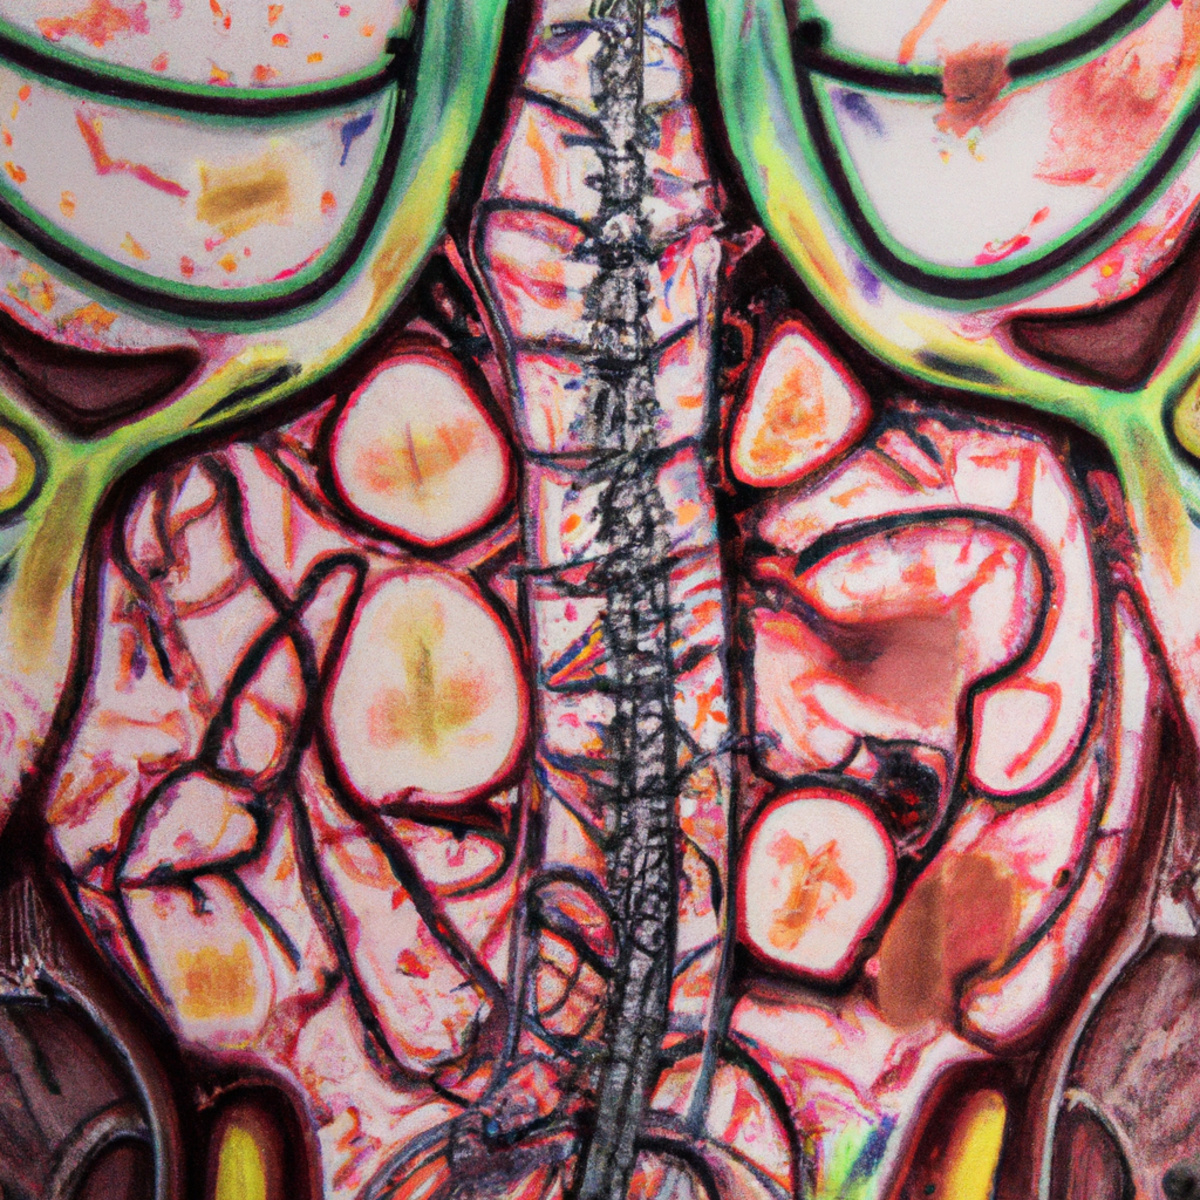 Close-up view of LAM-affected organs, showcasing intricate blood vessels, vibrant colors, and textures, emphasizing their interconnectedness.